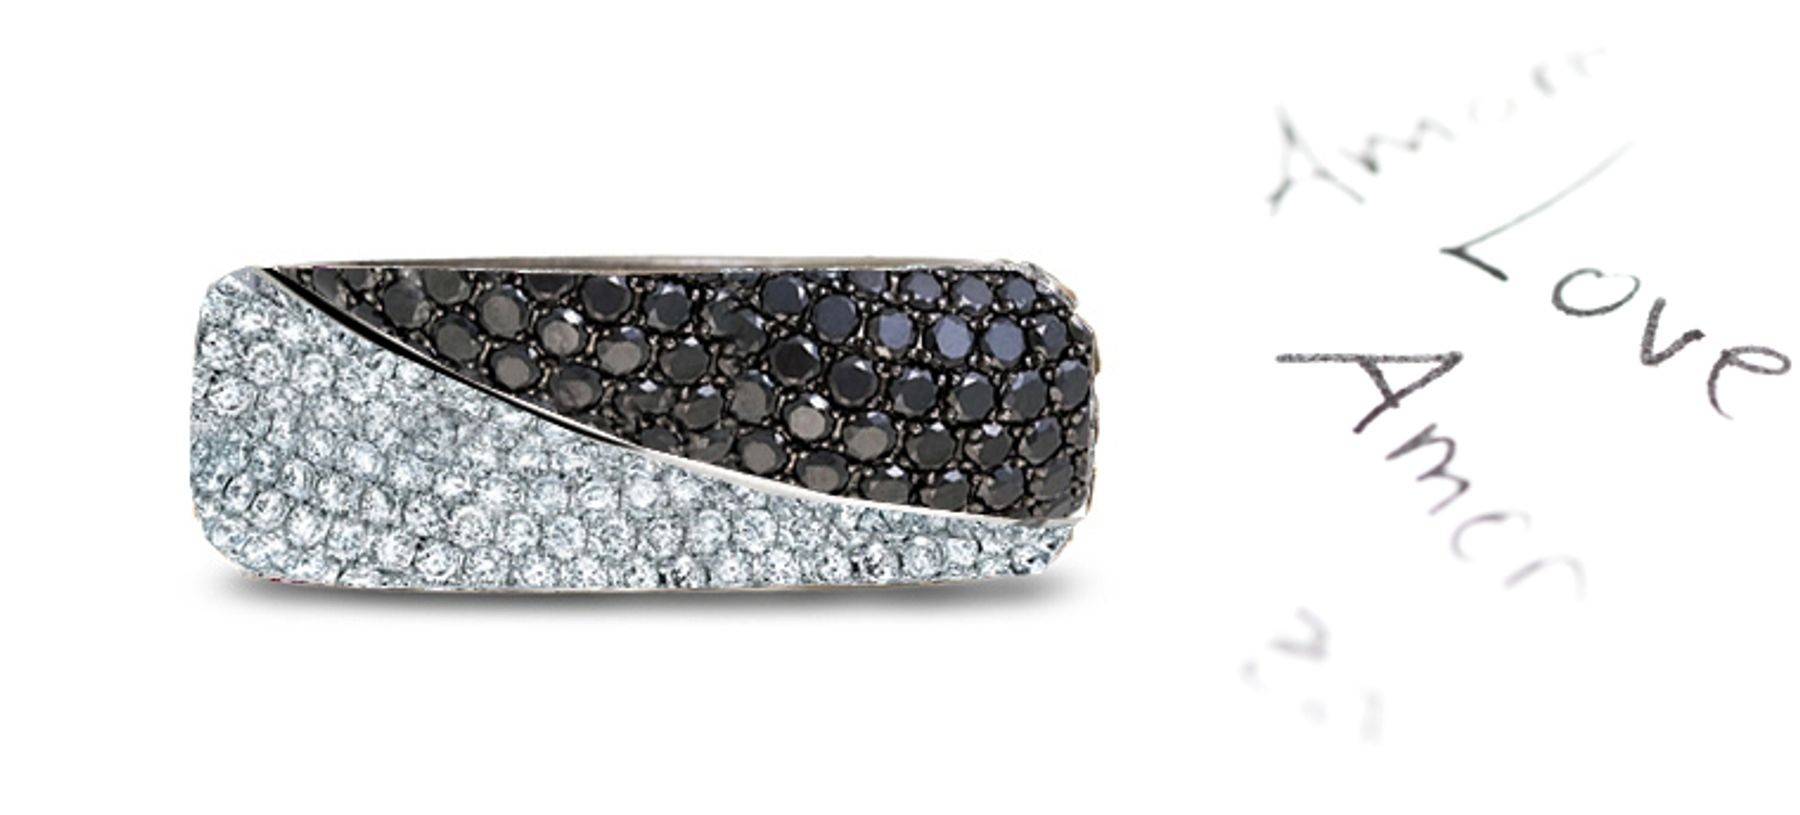 5 mm Wide Sliced in Two Wavy Halves with Metal Micropavee Encrusted White & Black Diamonds